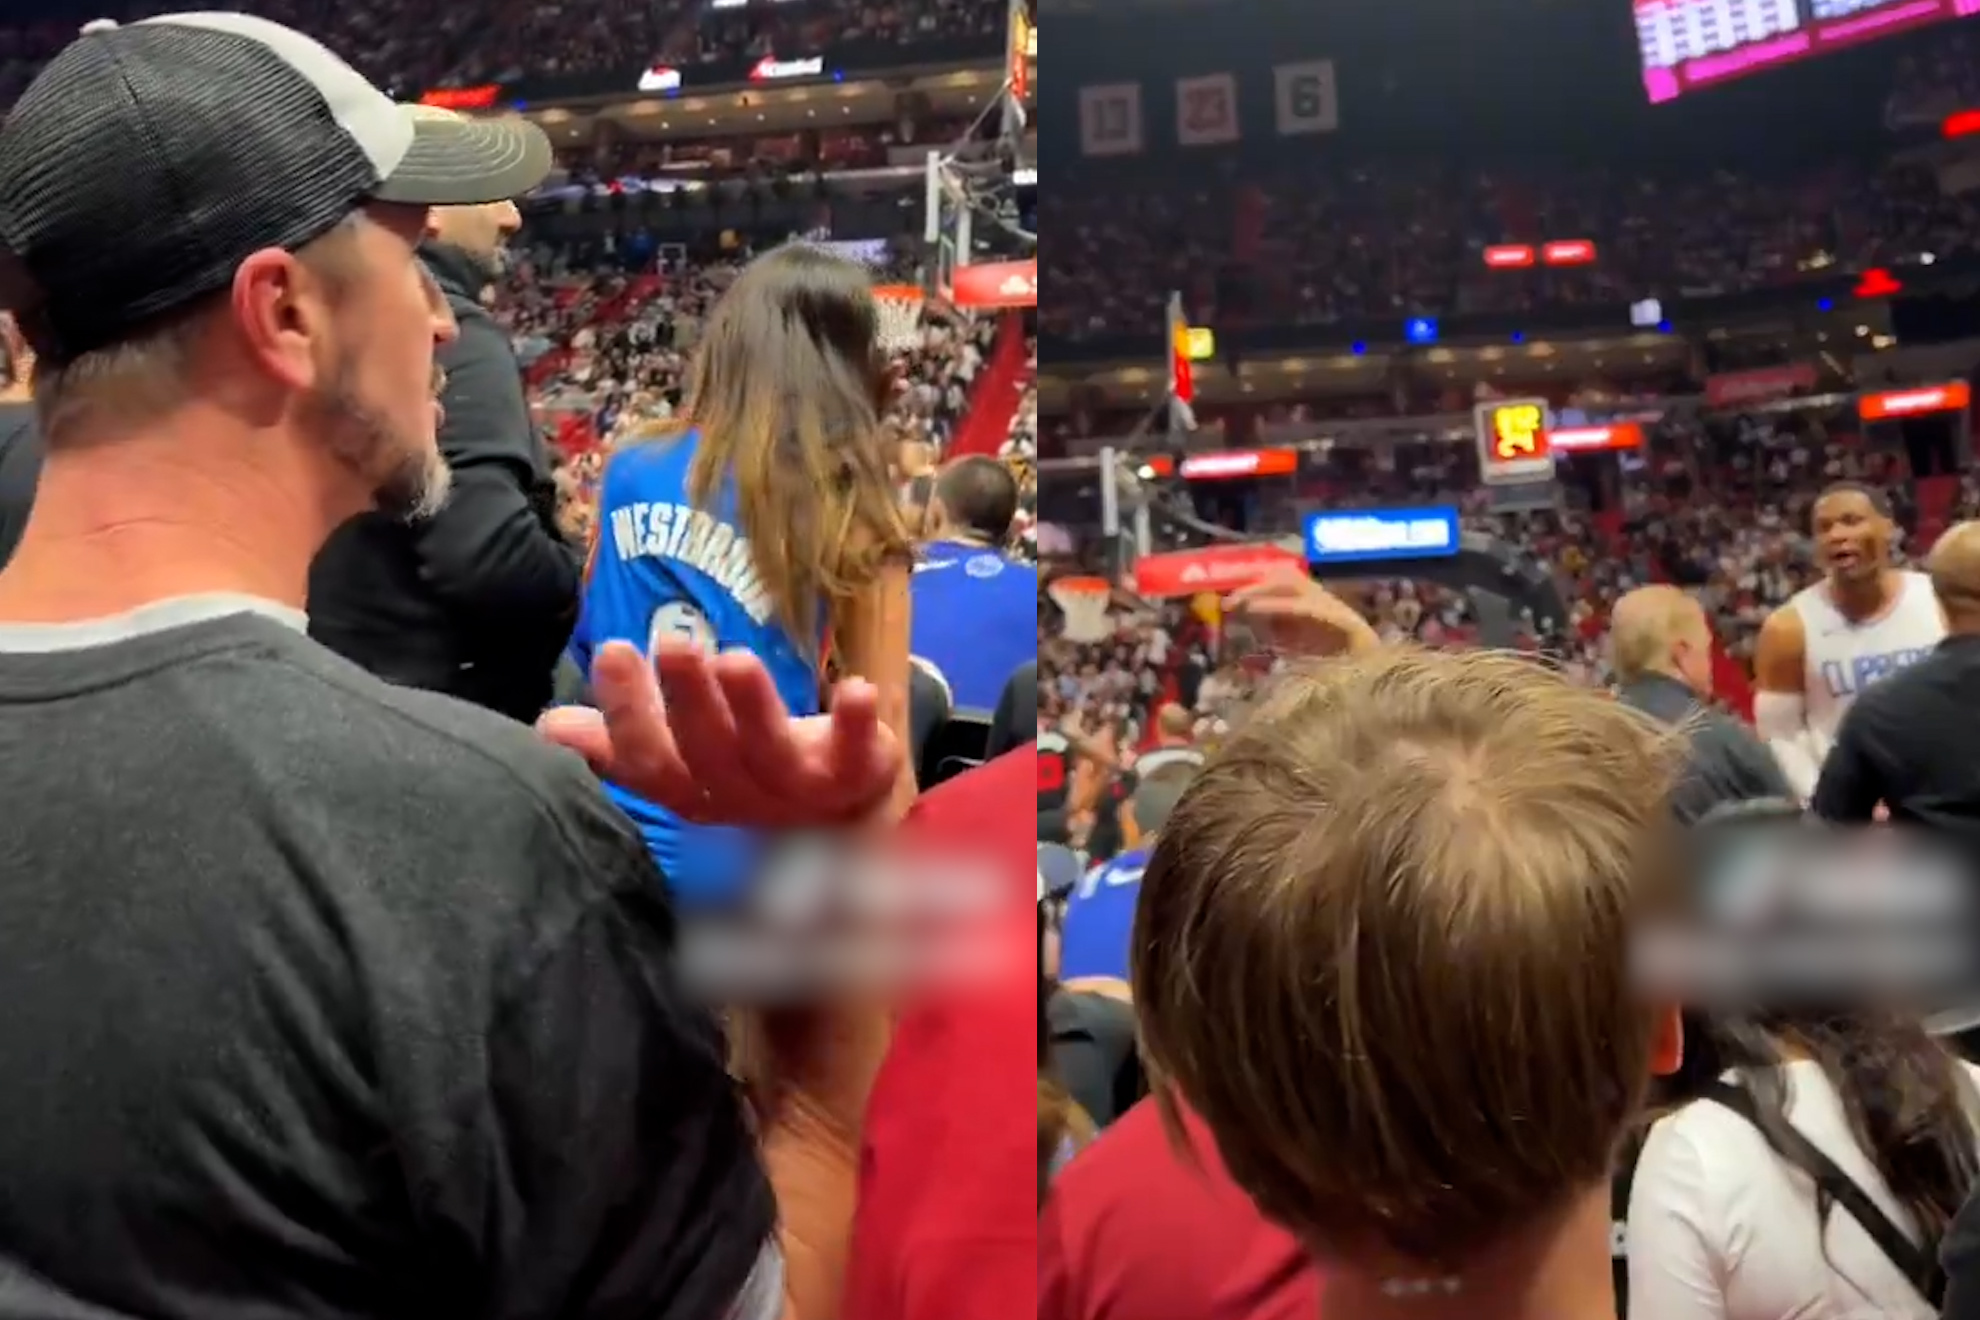 Clippers Russell Westbrook gets into heated argument with Miami Heat fan who is ejected from game